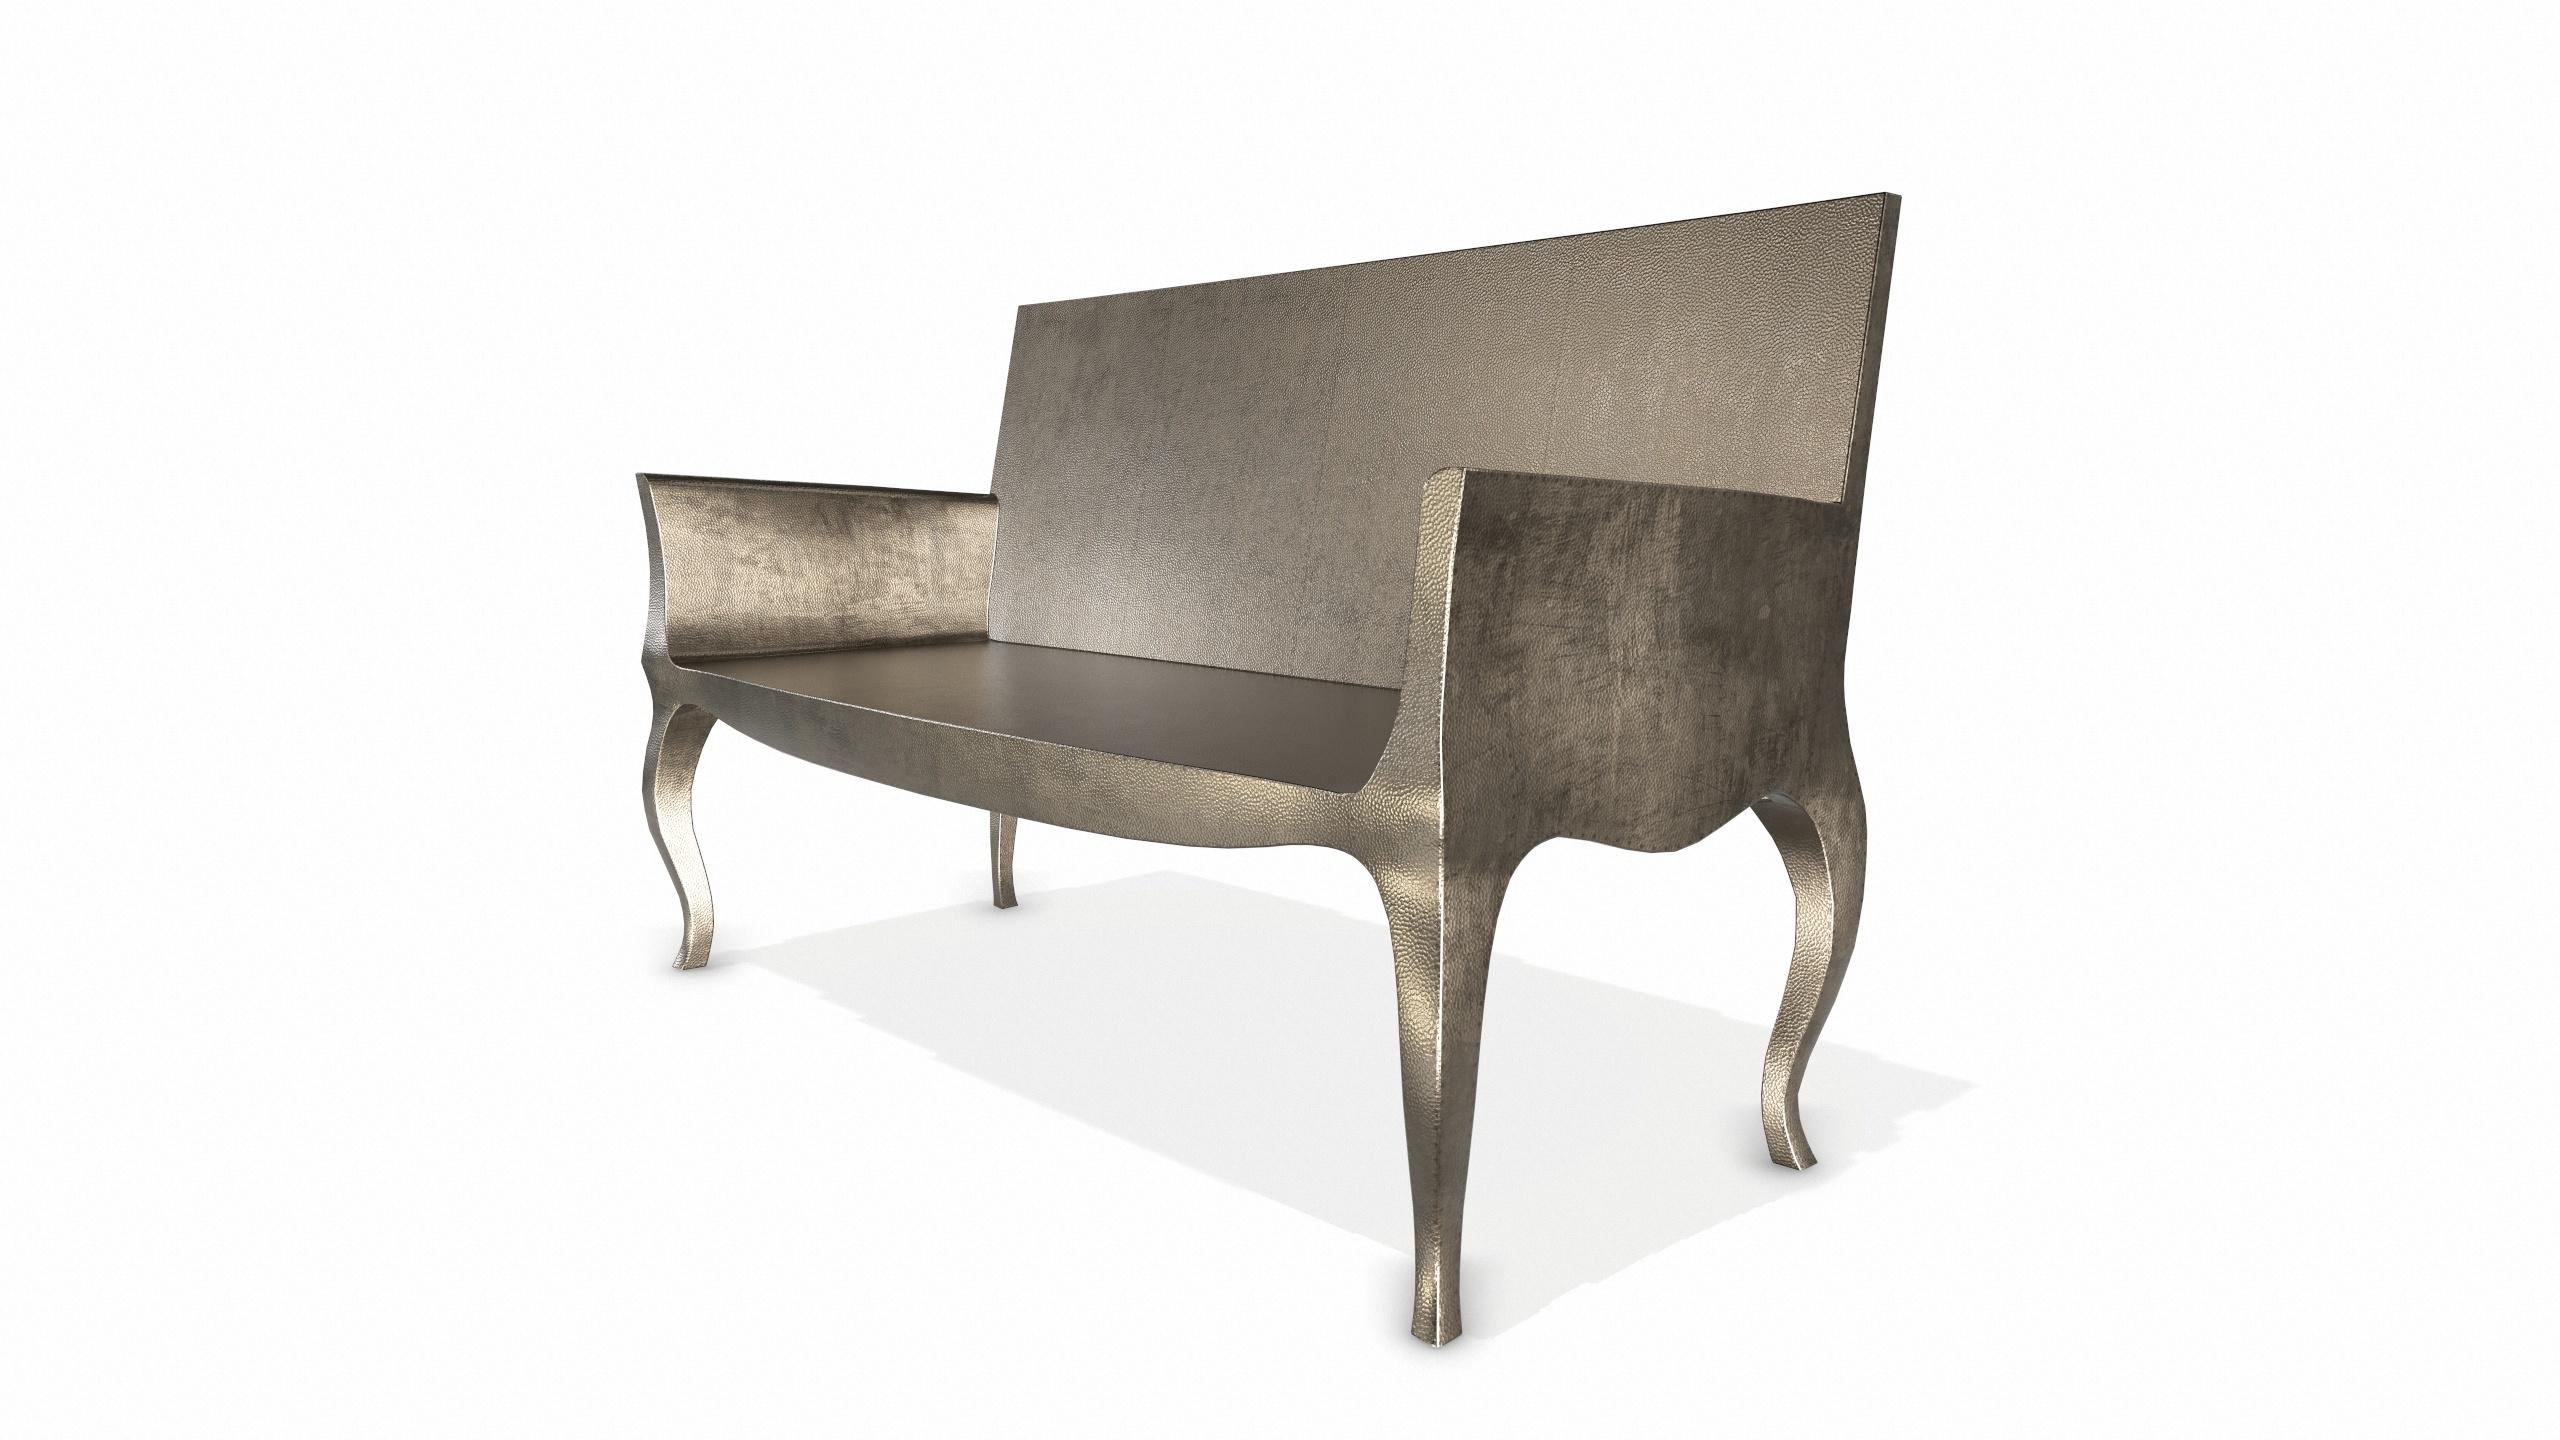 Woodwork Louise Settee Art Deco Daybeds in Mid. Hammered Antique Bronze by Paul Mathieu  For Sale